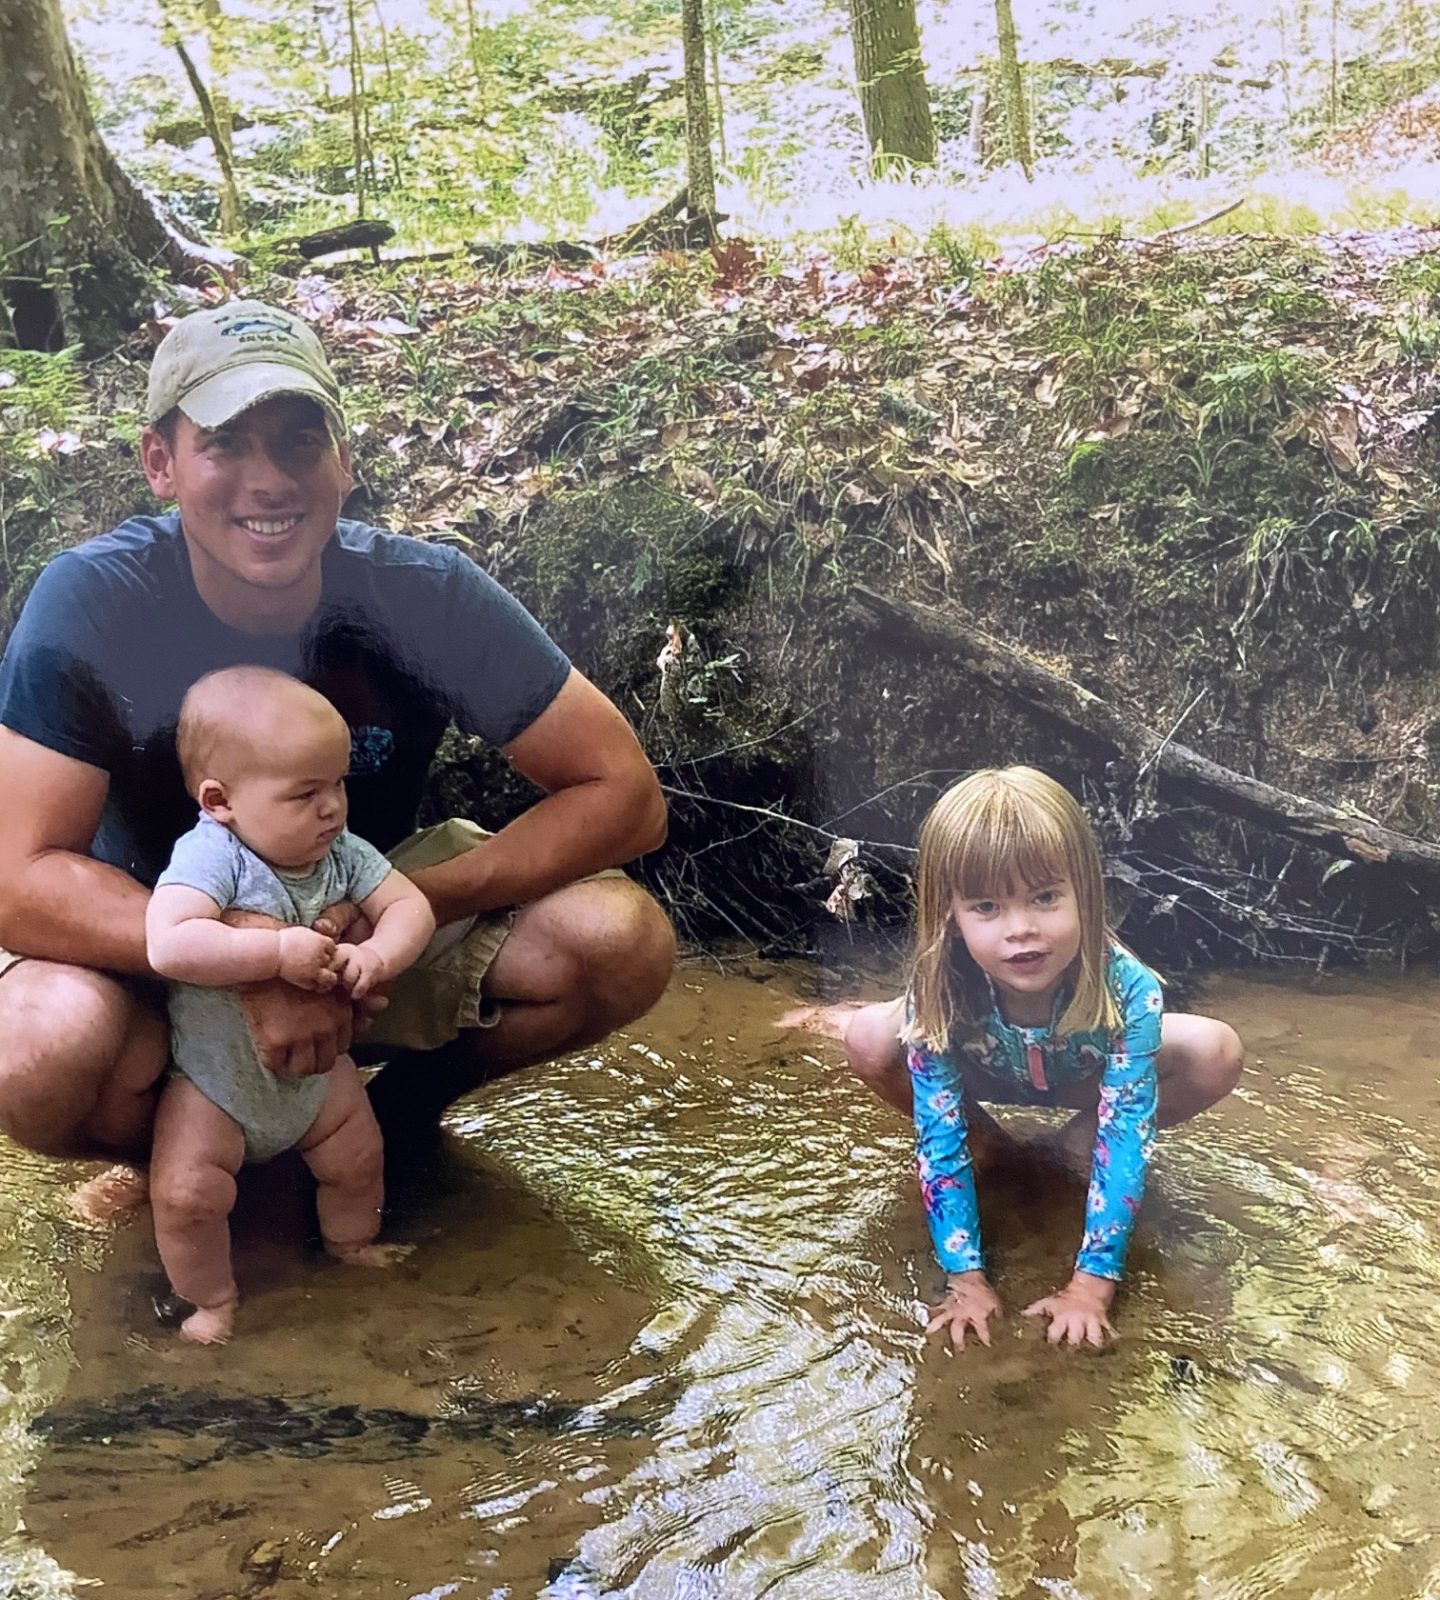 An image of two children and their father in a creek